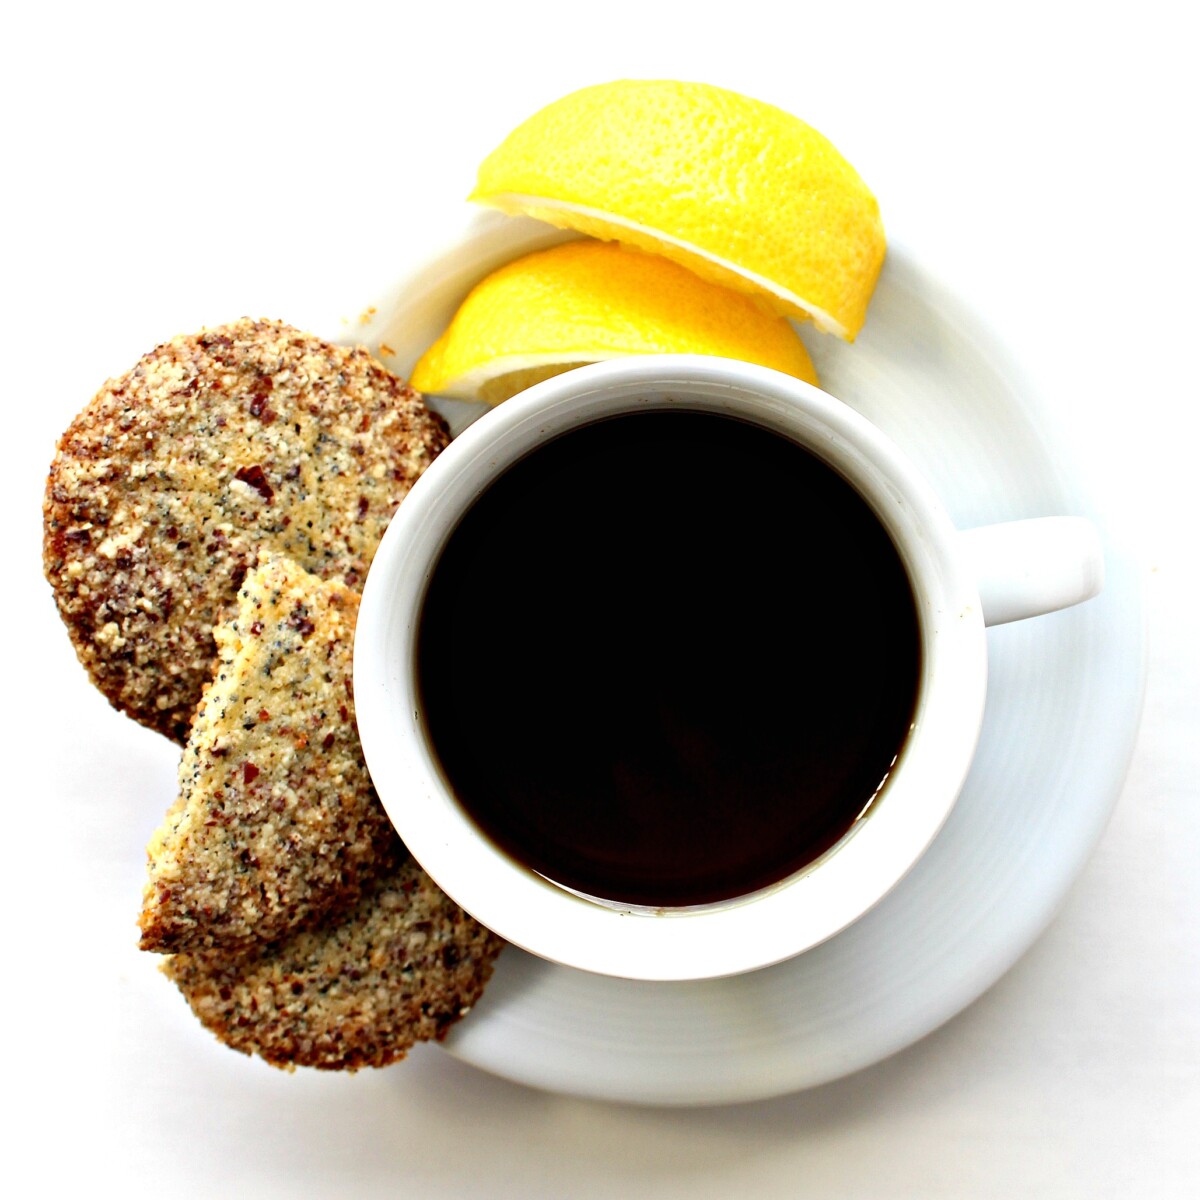 Overhead cup of tea with lemon slices and Lemon Poppy Seed Cookies on the saucer.